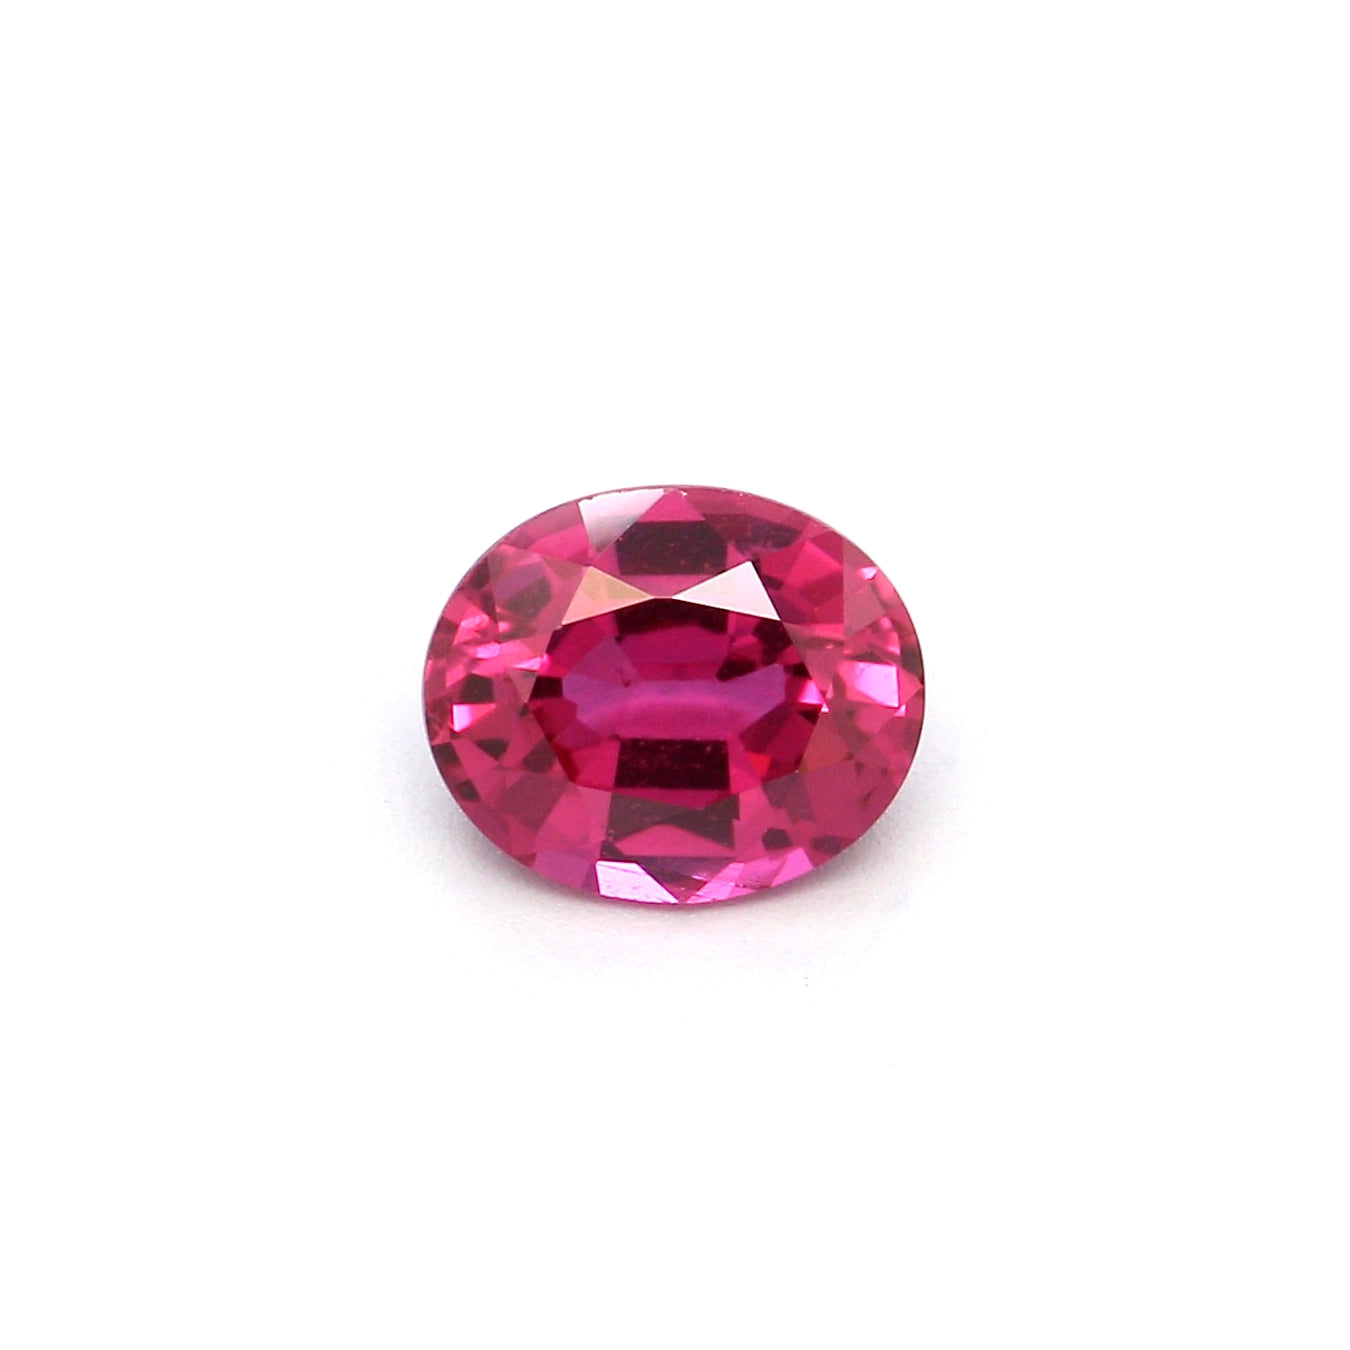 0.59ct Pink, Oval Sapphire, Heated, Basaltic - 5.53 x 4.62 x 2.83mm